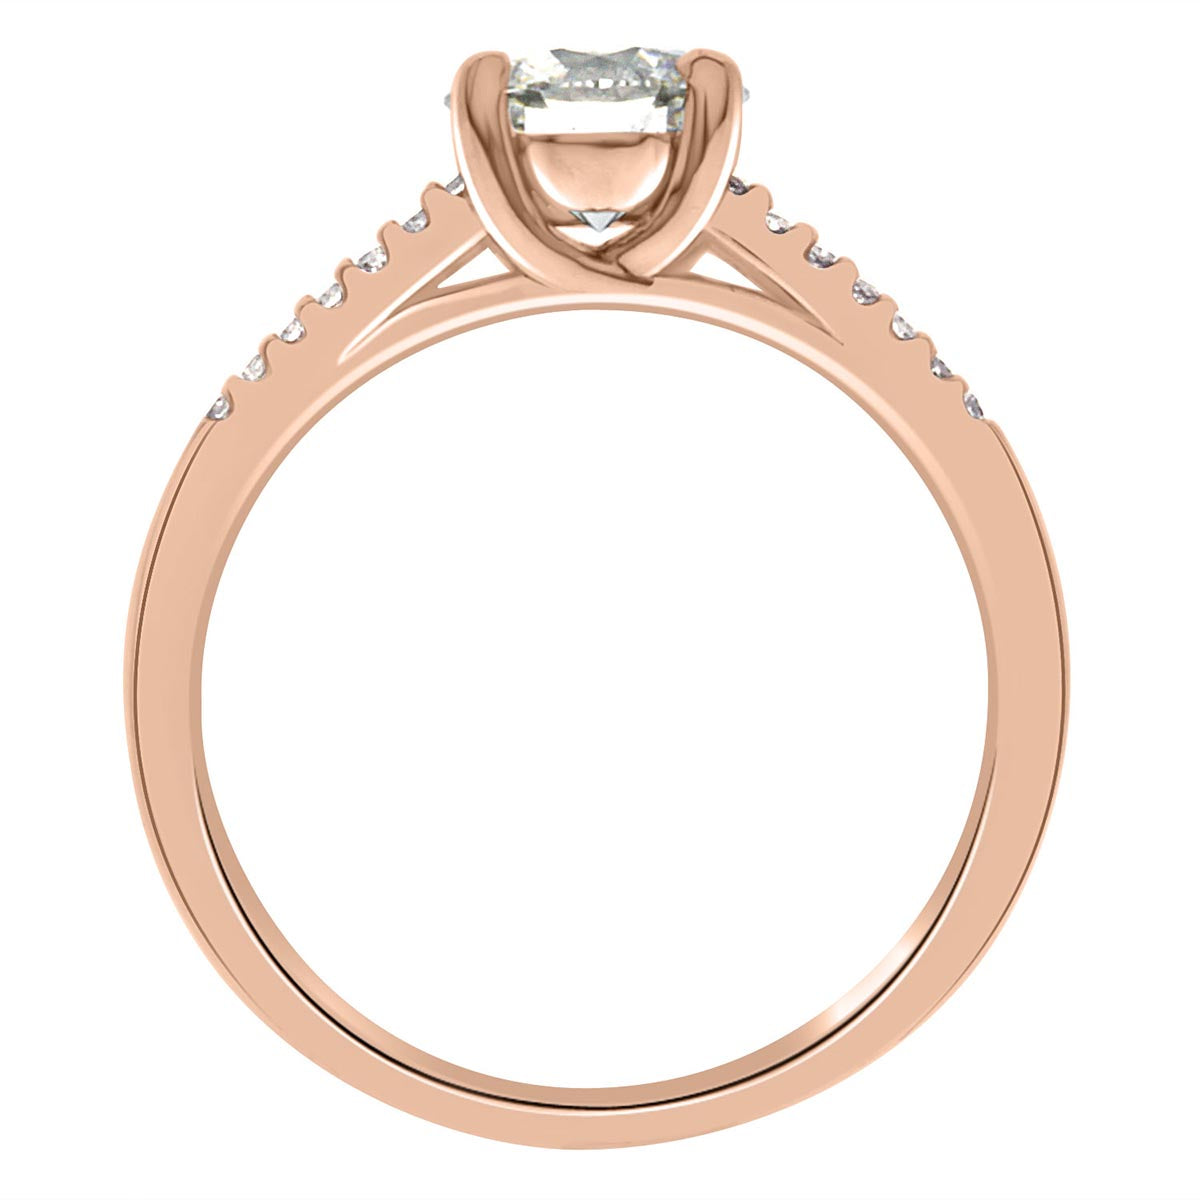 Round Diamond With Split Band made from rose gold standing upright